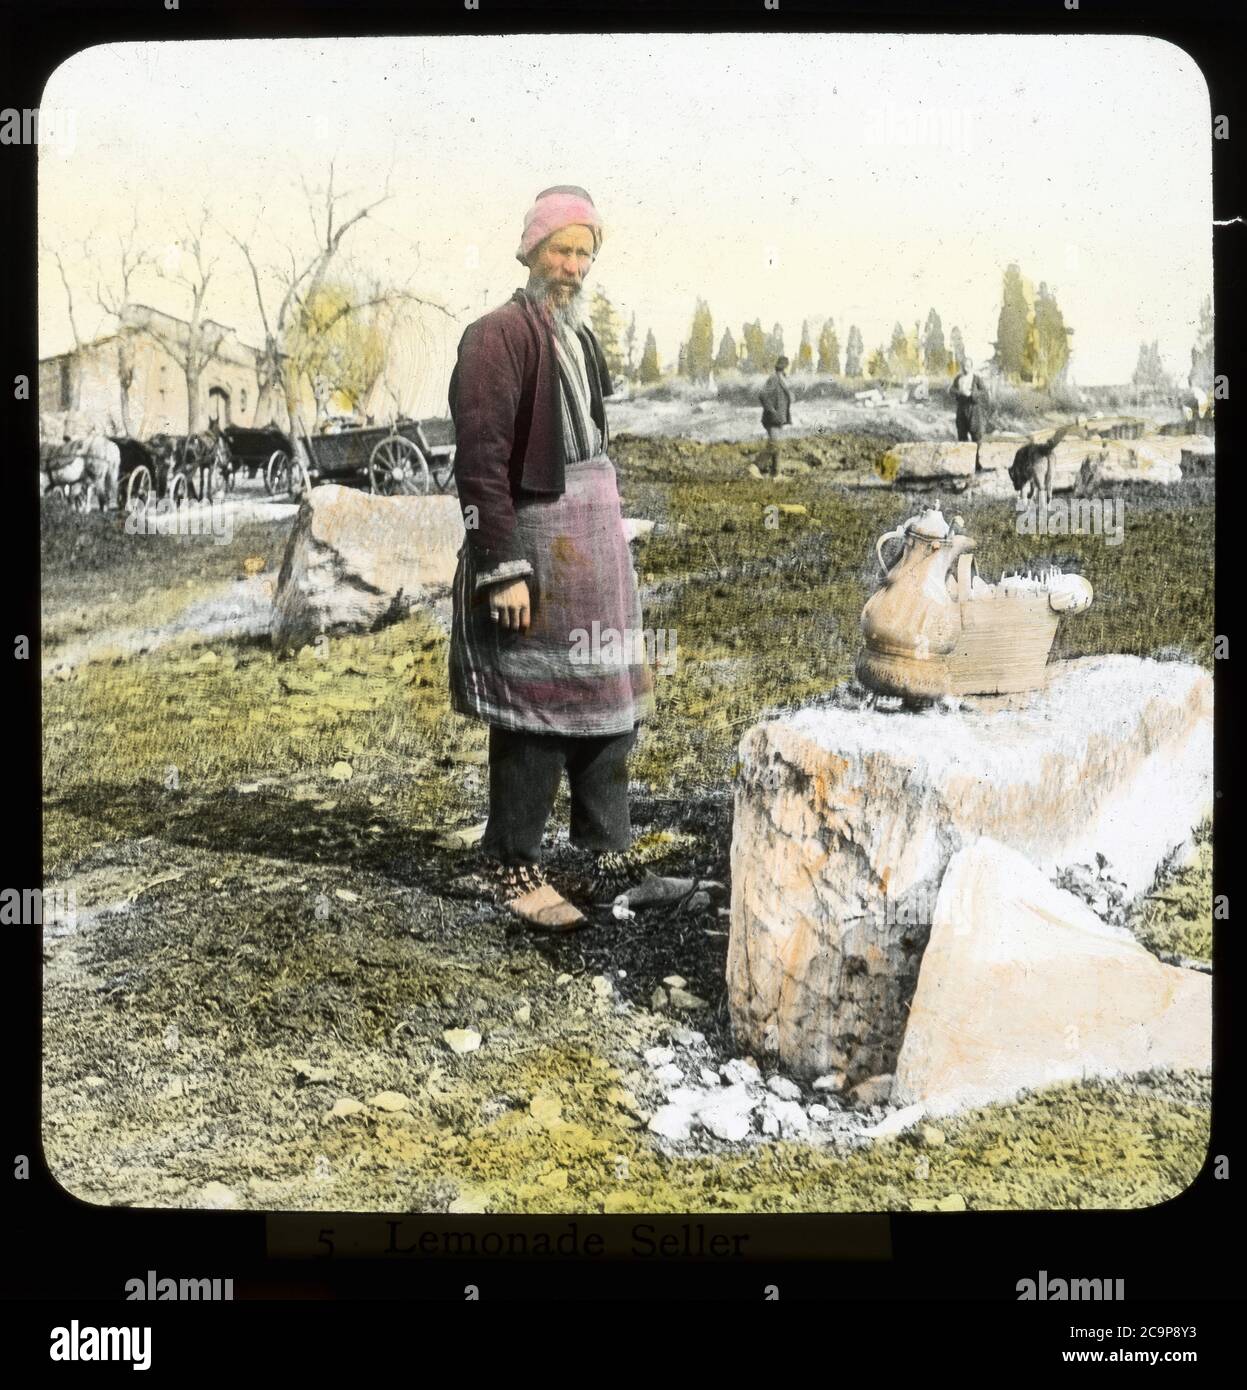 Tea vendor taking a break in Izmir/Smyrna, Turkey. Hand-colored photograph on dry glass plate from the Herry W. Schaefer collection, around 1910. Stock Photo